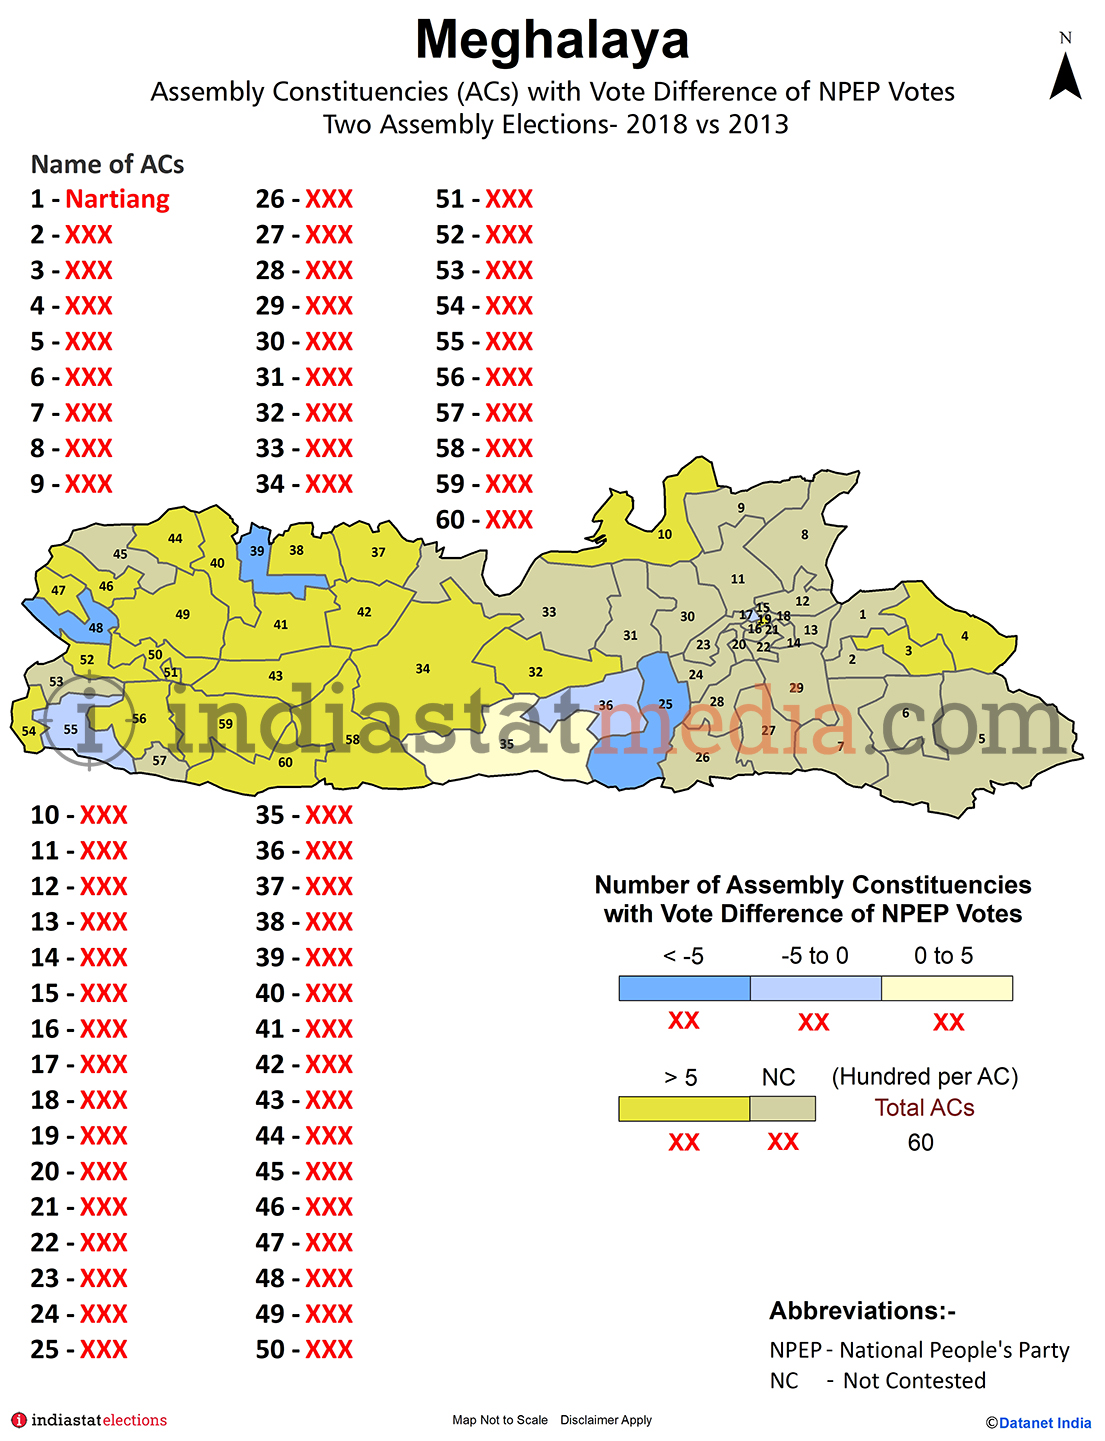 Assembly Constituencies with Vote Difference of NPEP Votes in Meghalaya (Assembly Election - 2013 & 2018)